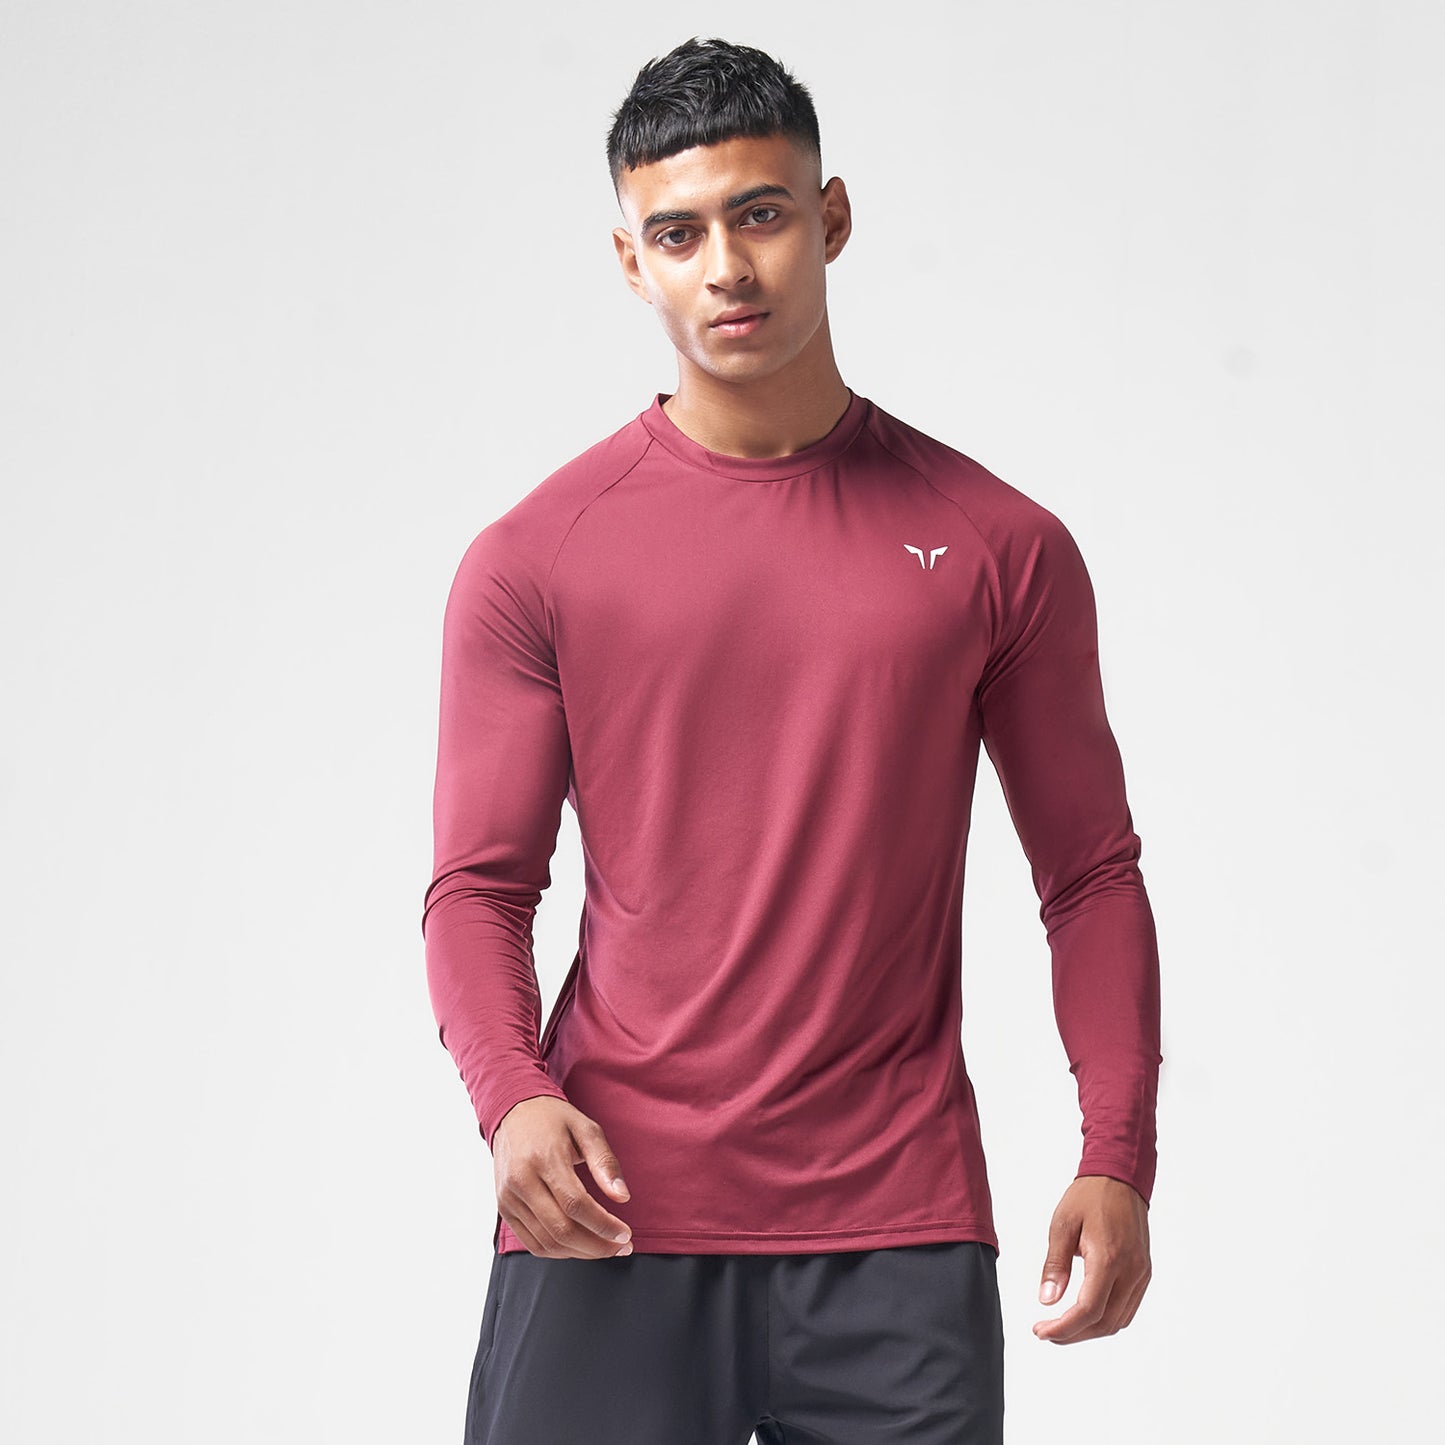 squatwolf-gym-wear-essential-ultralight-full-sleeves-tee-burgundy-workout-shirts-for-men